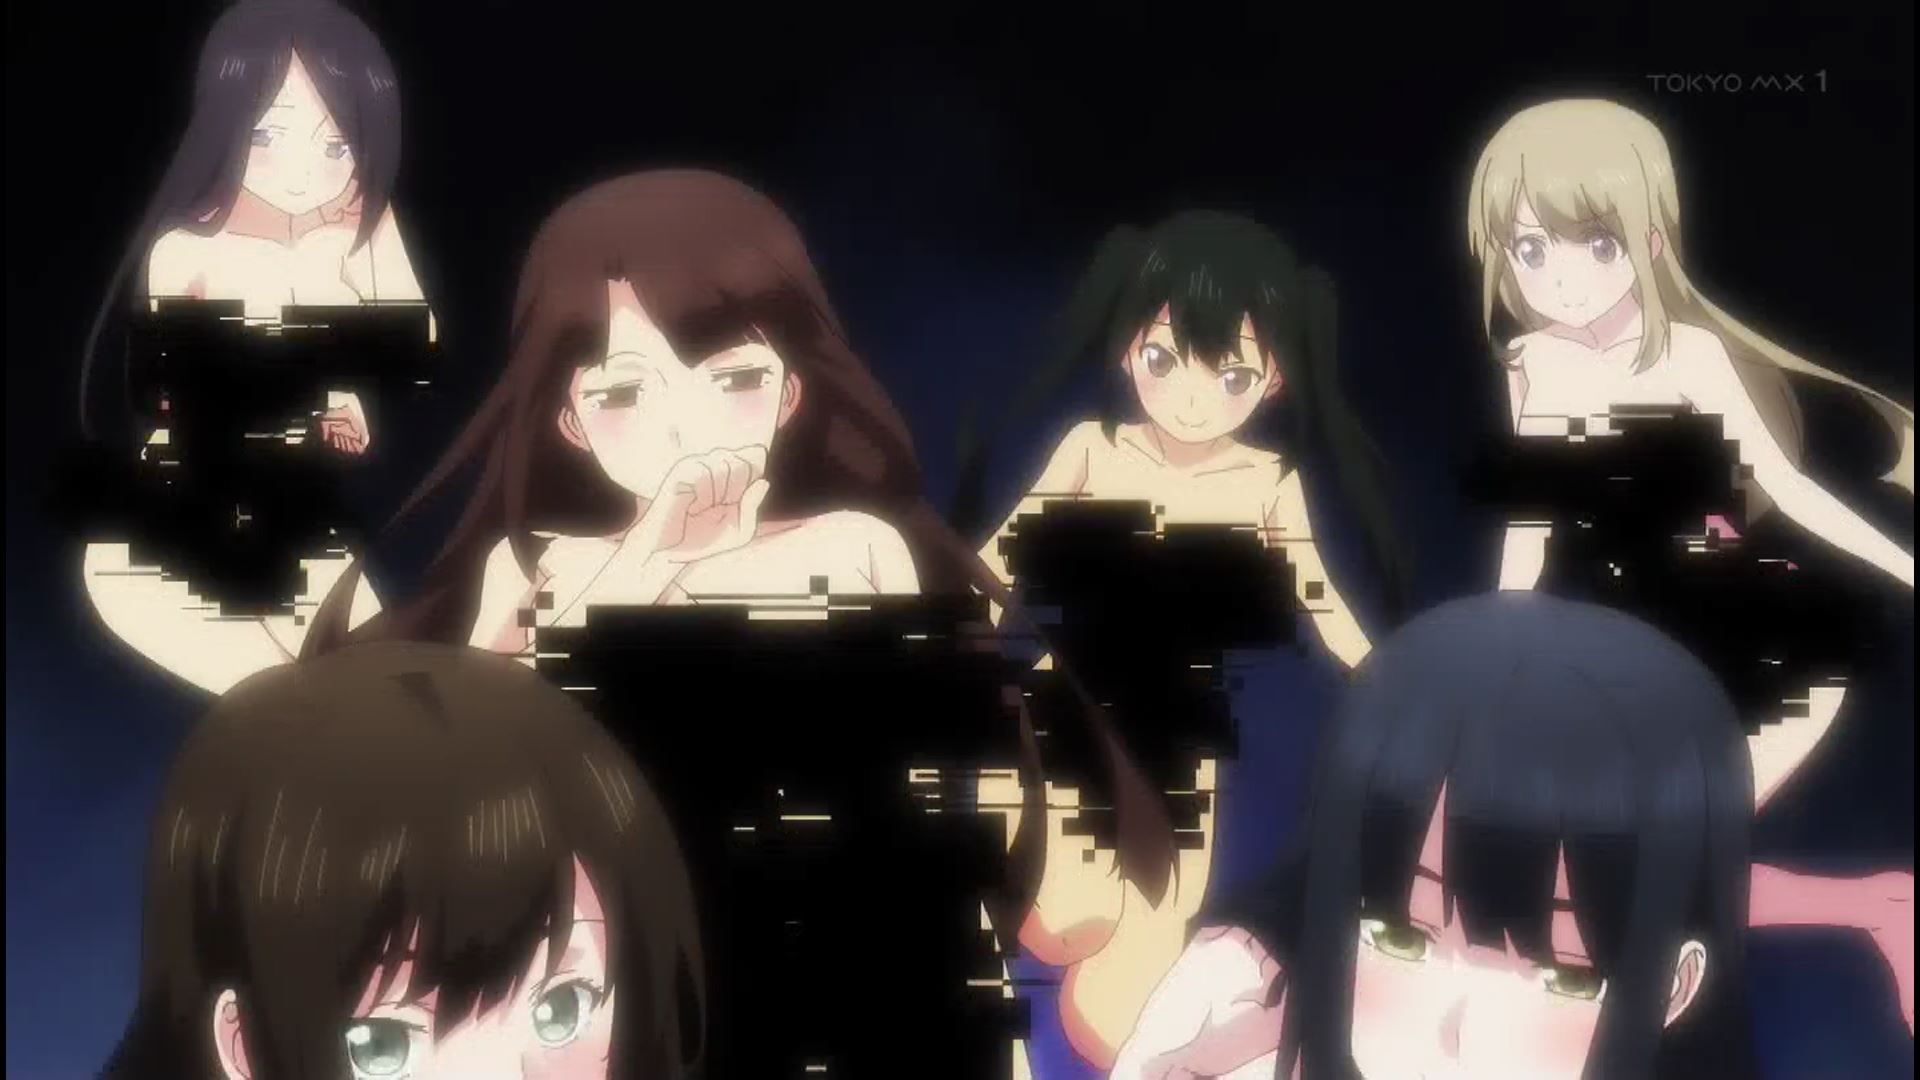 In the anime "Doomsday Harlem" episode 1, there is a scene where a girl and a girl are on the verge of being naked in a world of only men and nakedness 24